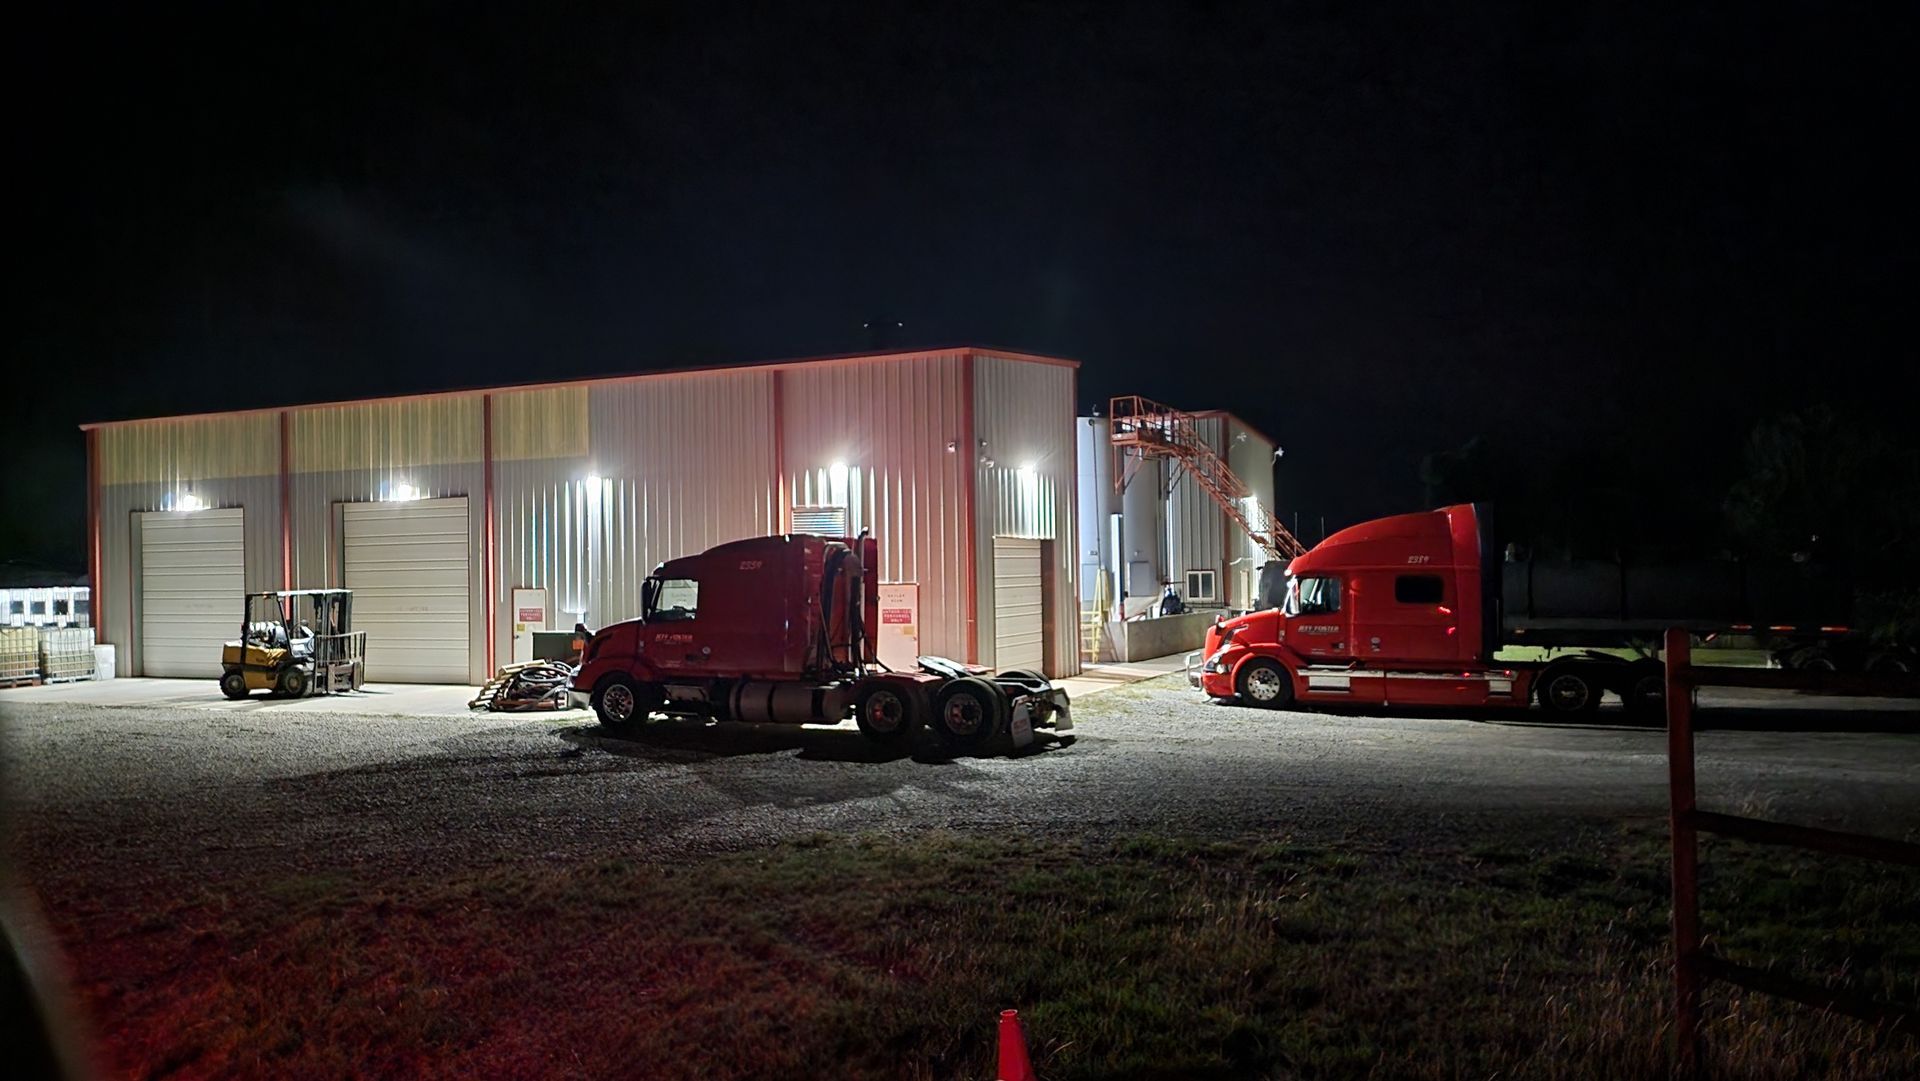 A red semi truck is parked in front of a building at night.